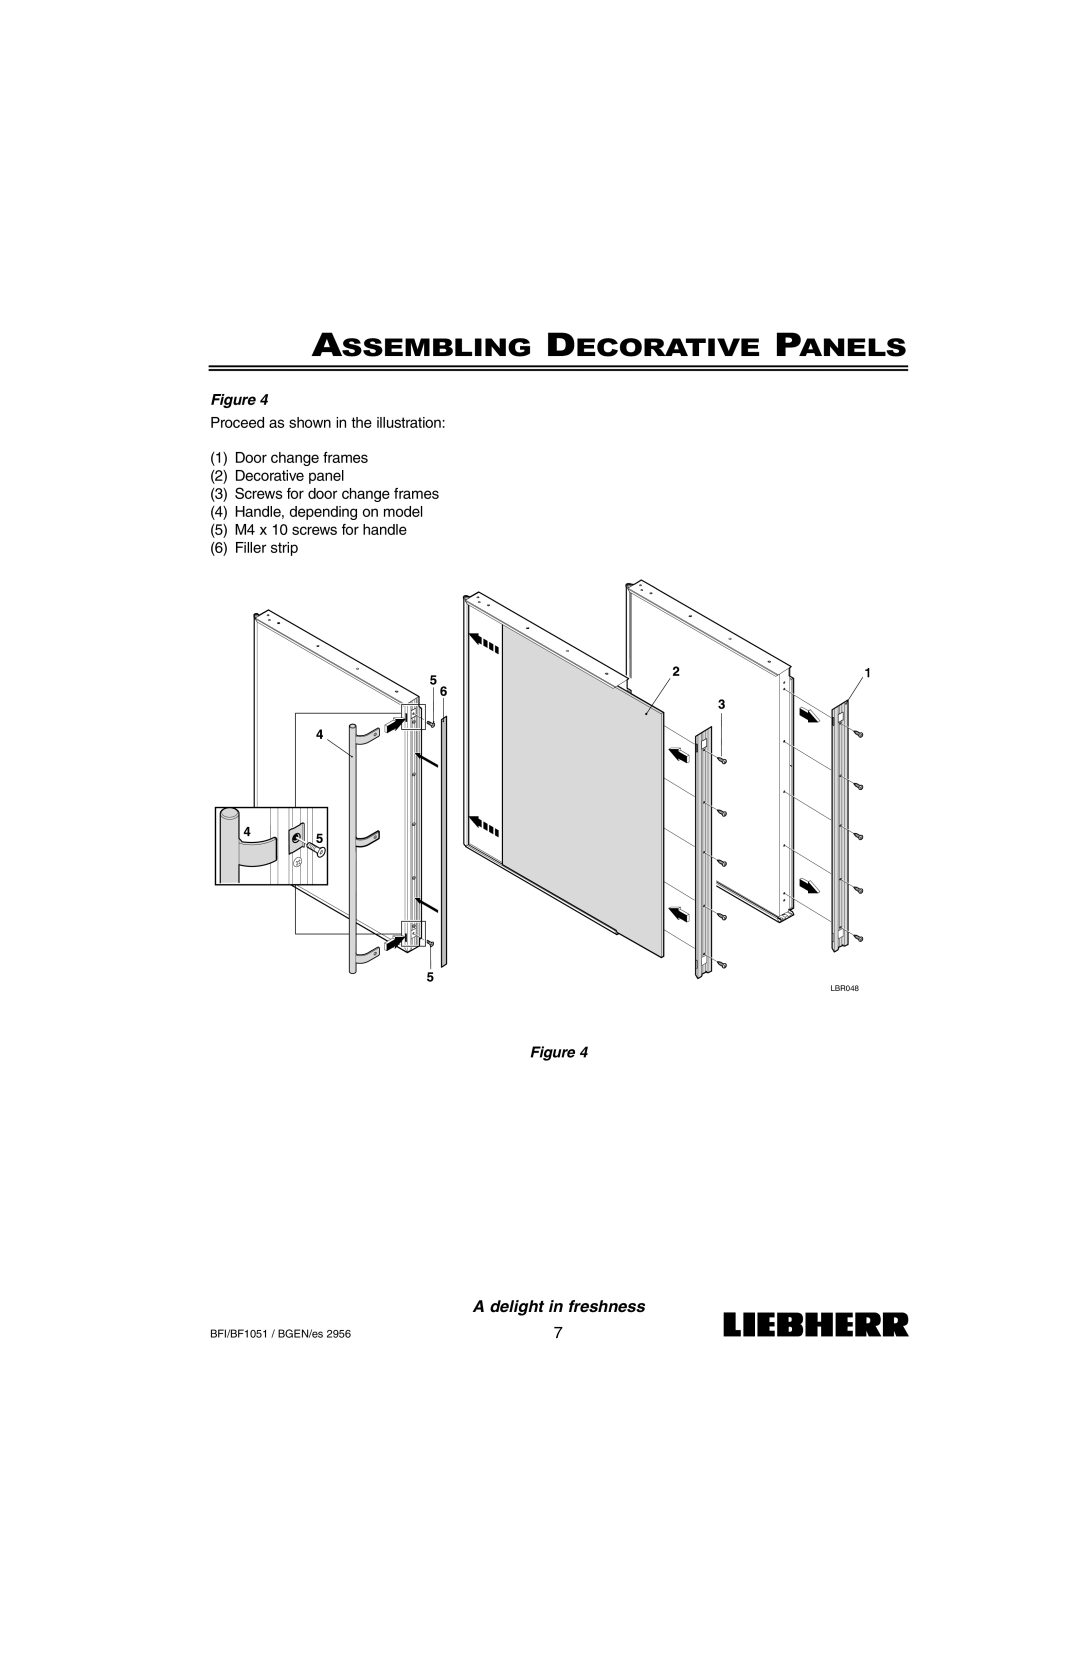 Liebherr BF1051, BFI1051 installation instructions Assembling Decorative Panels, A delight in freshness, Figure, LBR048 